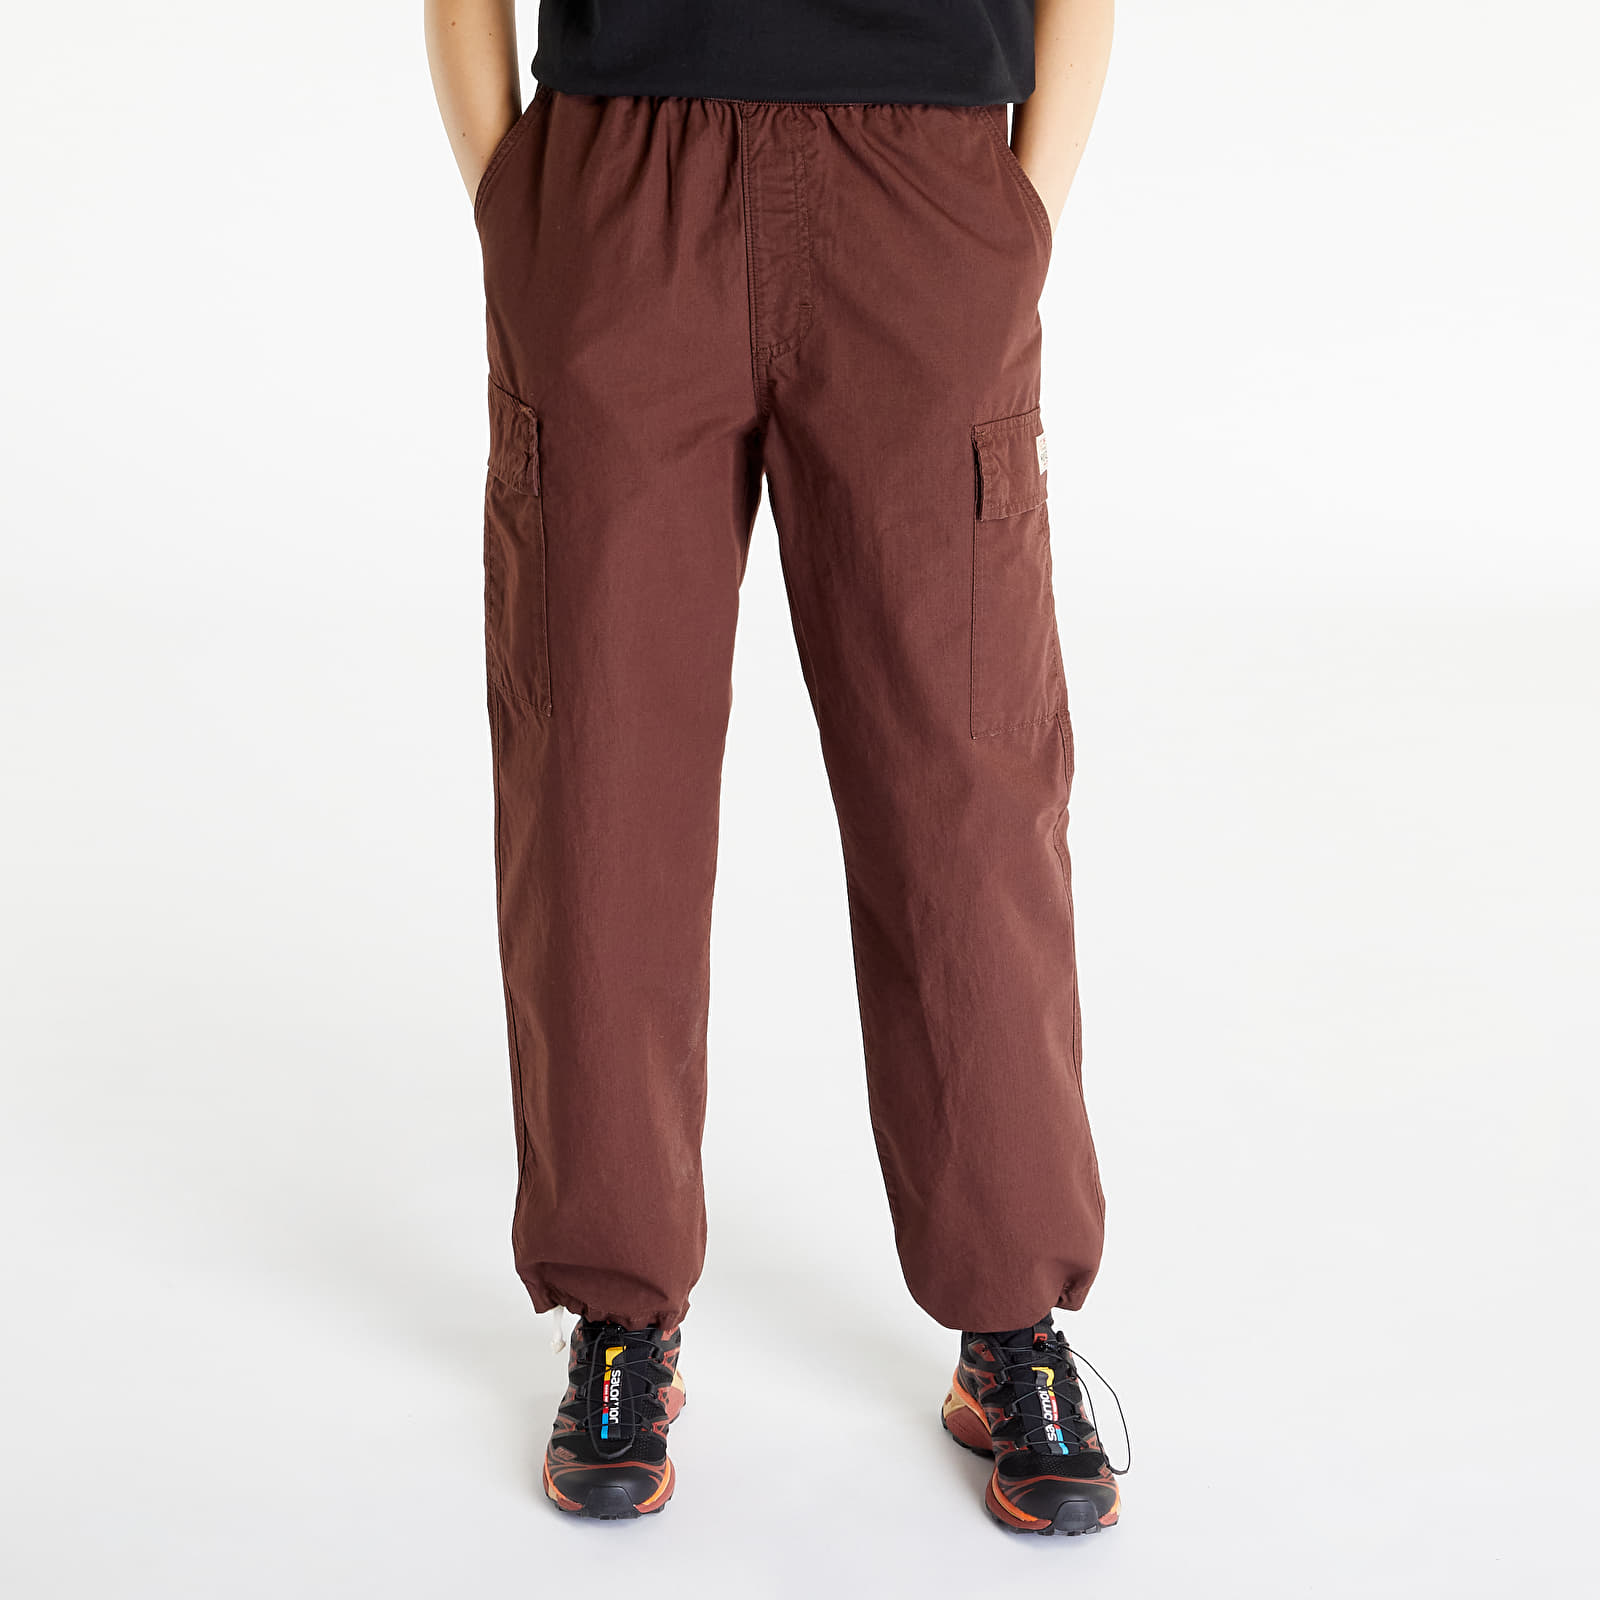 Pants and jeans Stüssy Ripstop Cargo Beach Pant UNISEX Brown